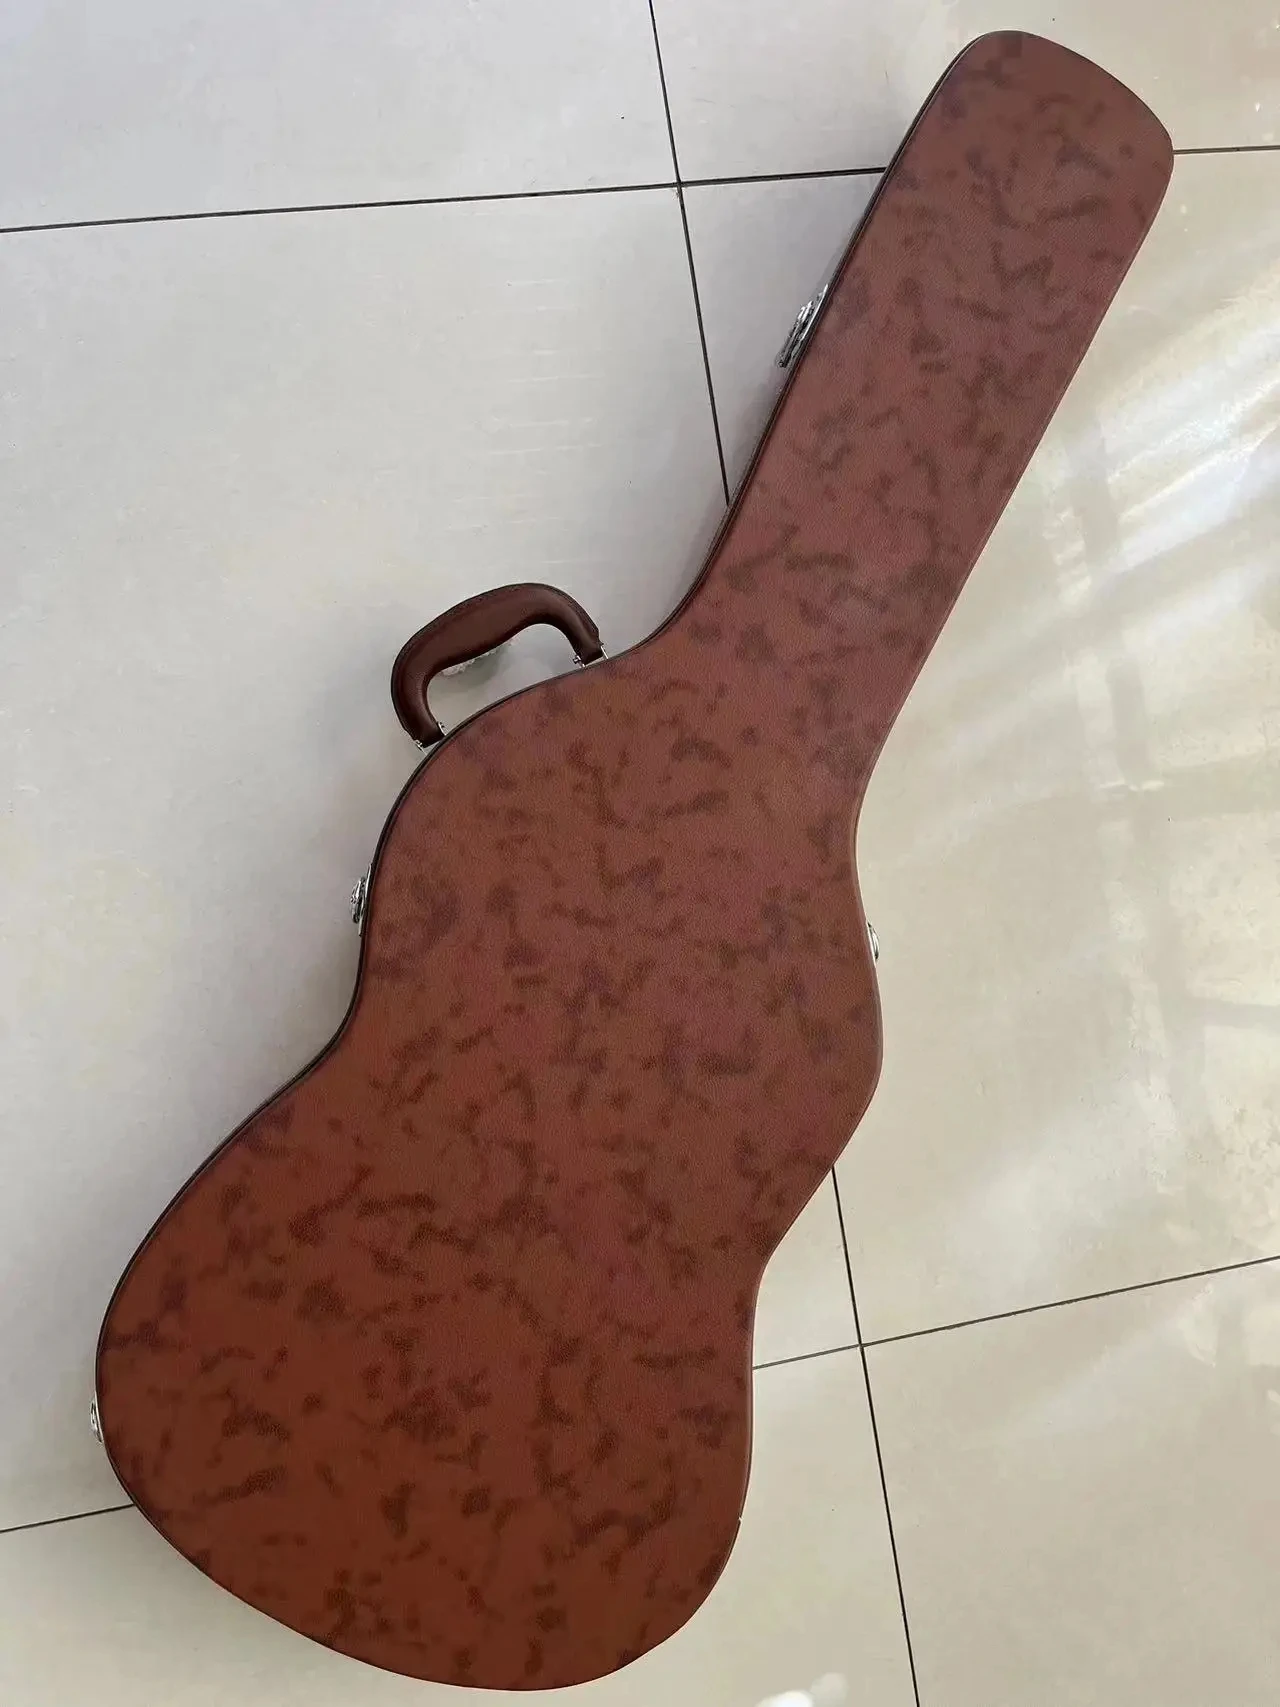 

Send in 5 days the link for the hardcase sell with guitar